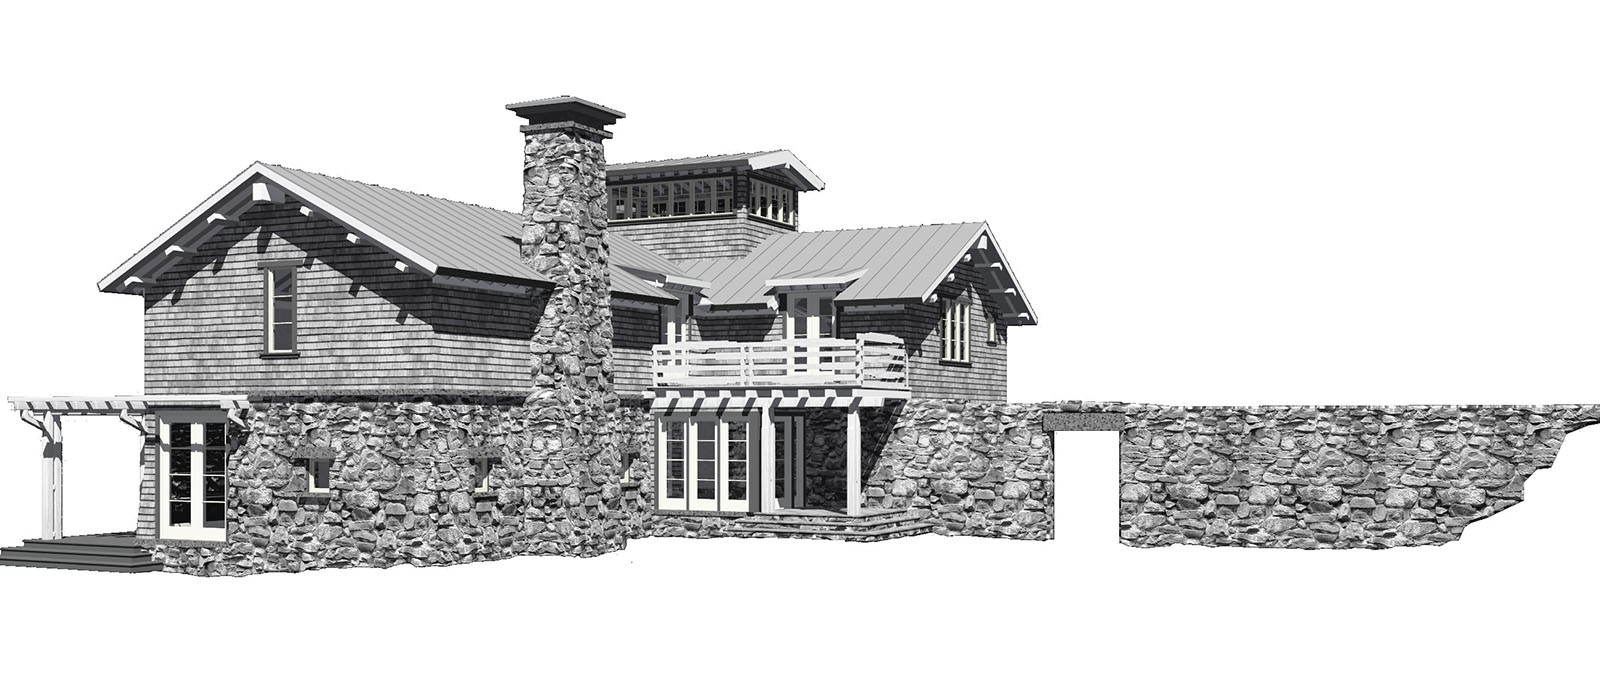 Knecht Model Entry Elevation Eroded Stone Wall